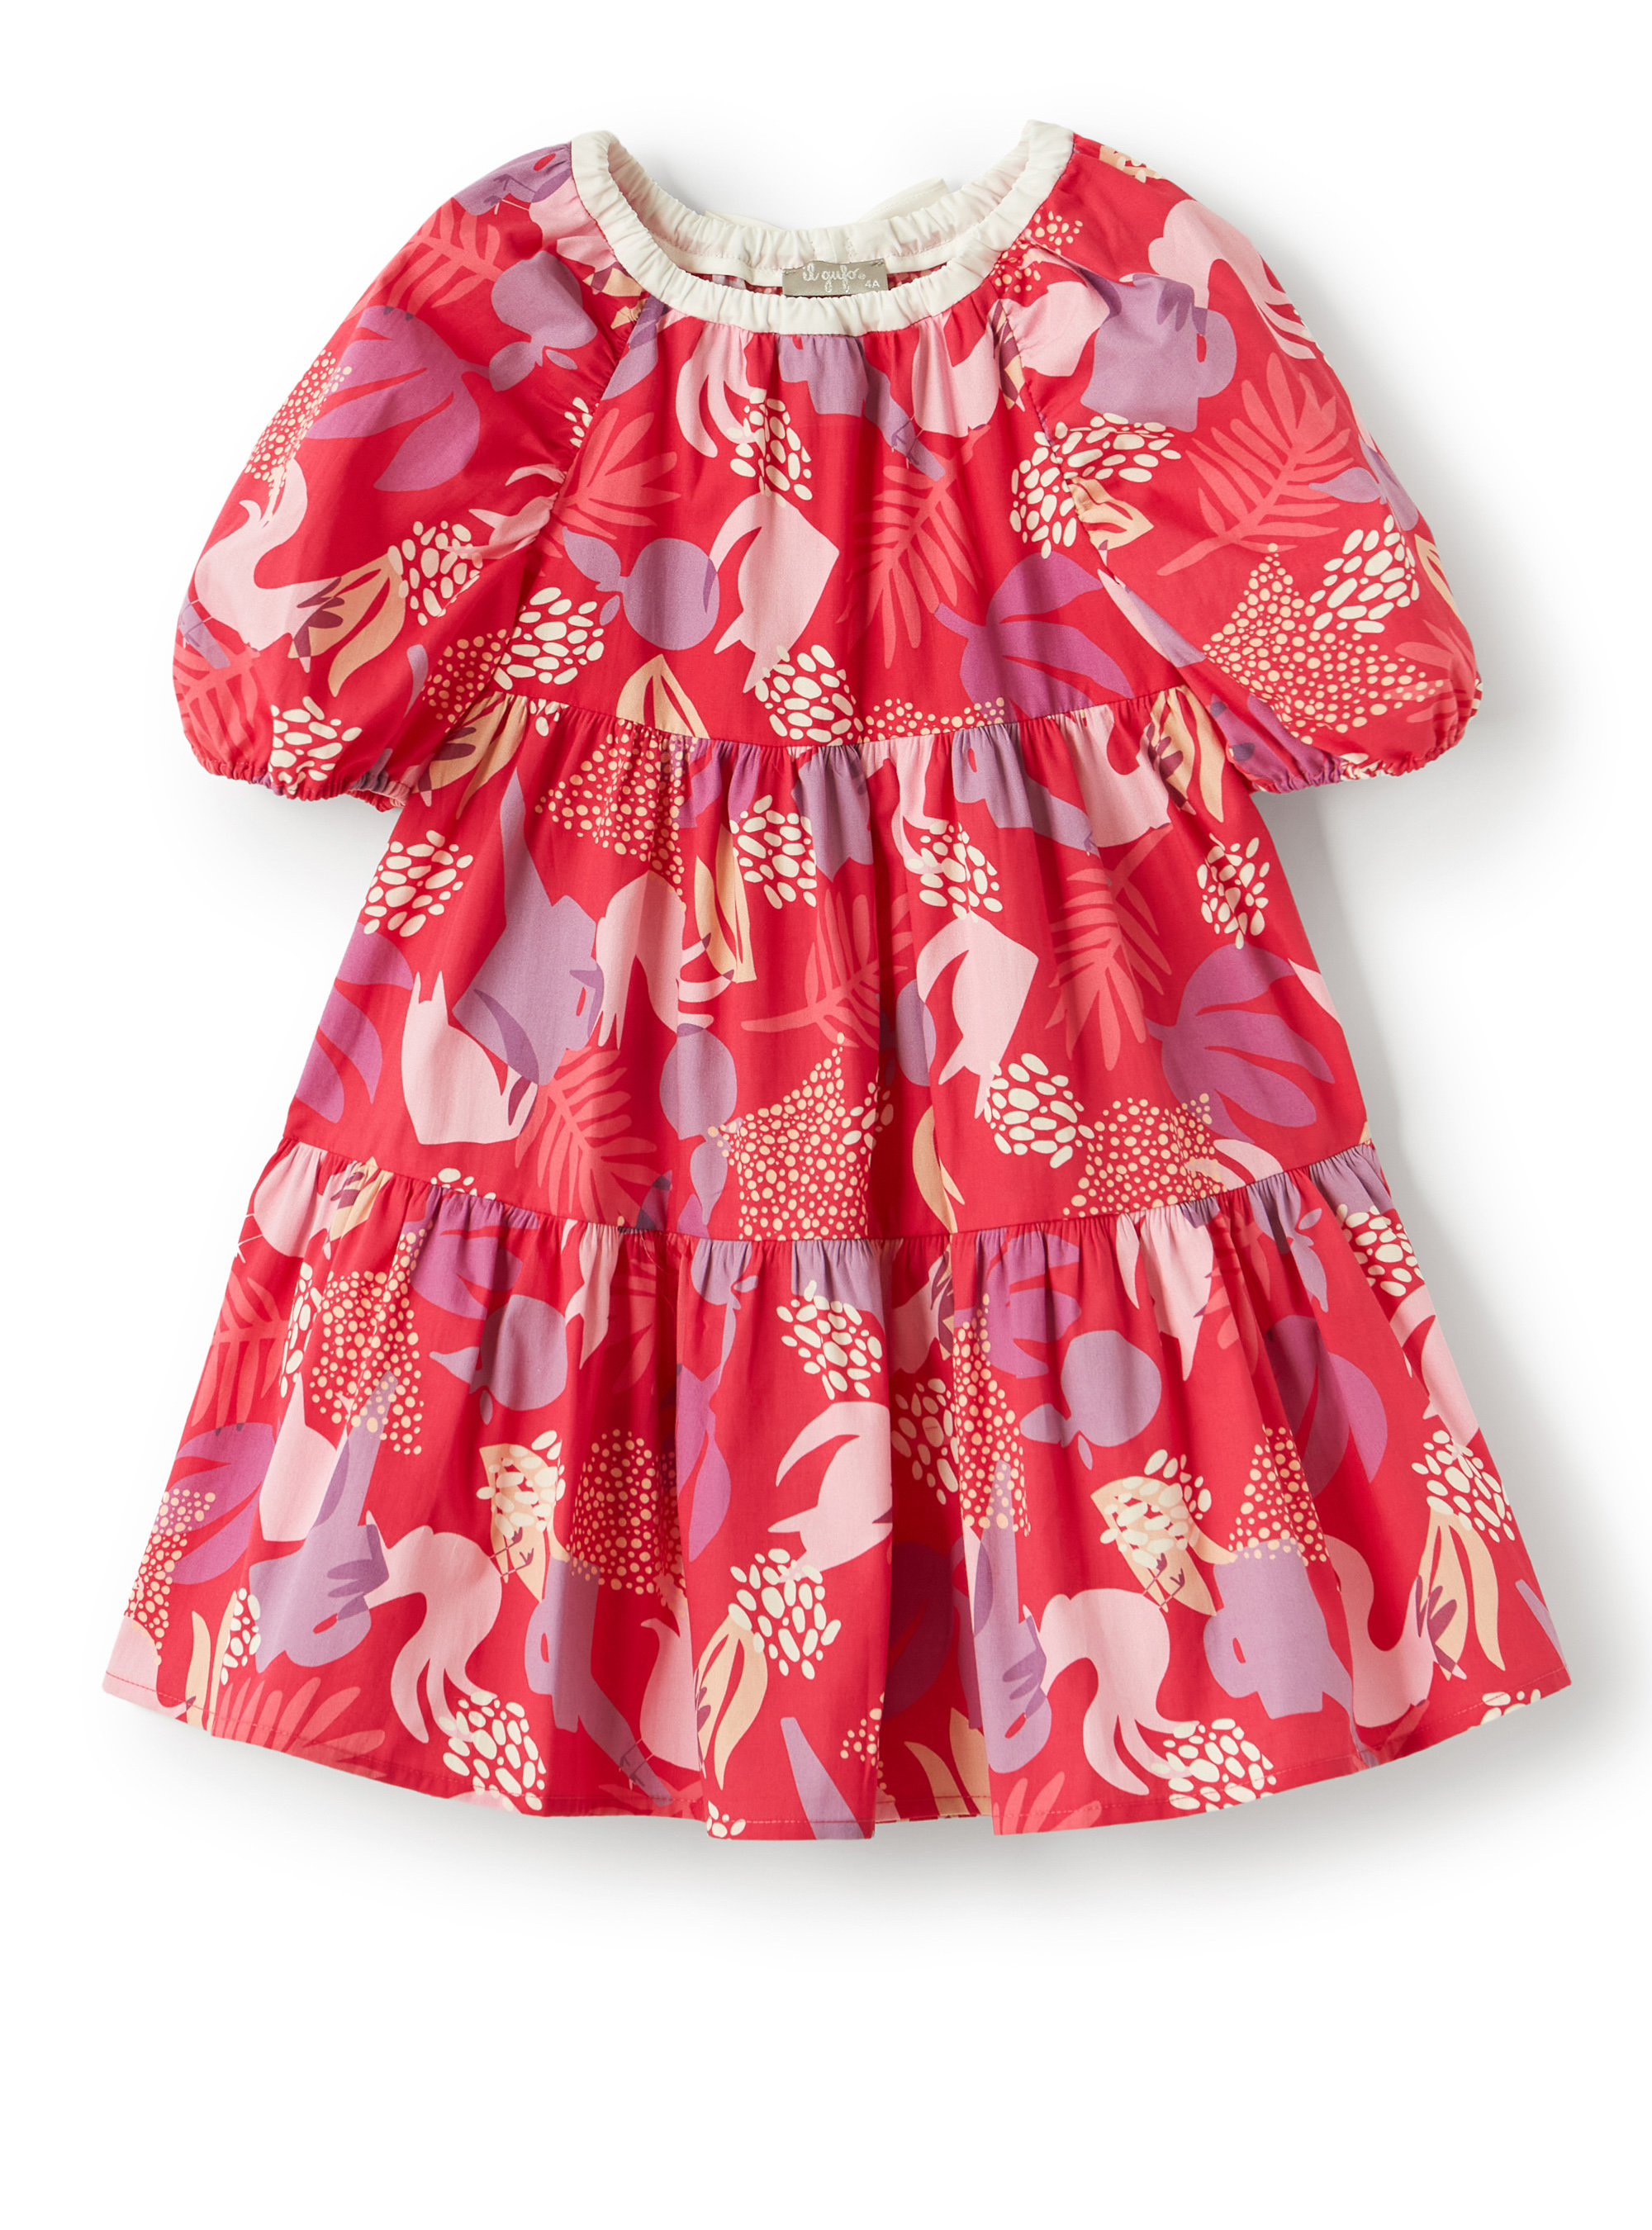 Dress with exclusive garden print - Dresses - Il Gufo